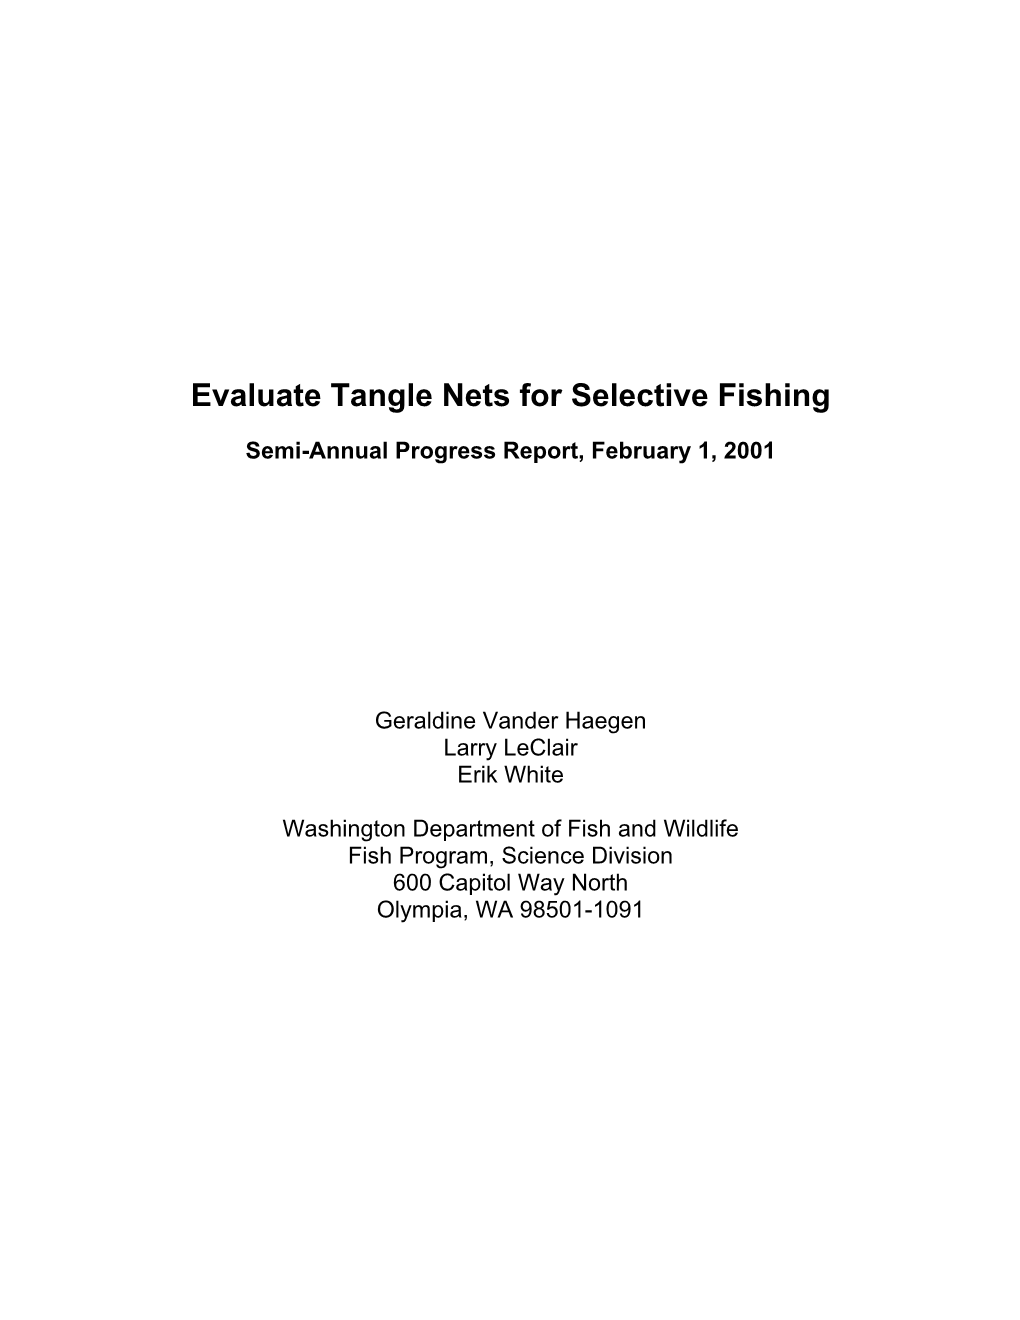 Evaluate Tangle Nets for Selective Fishing